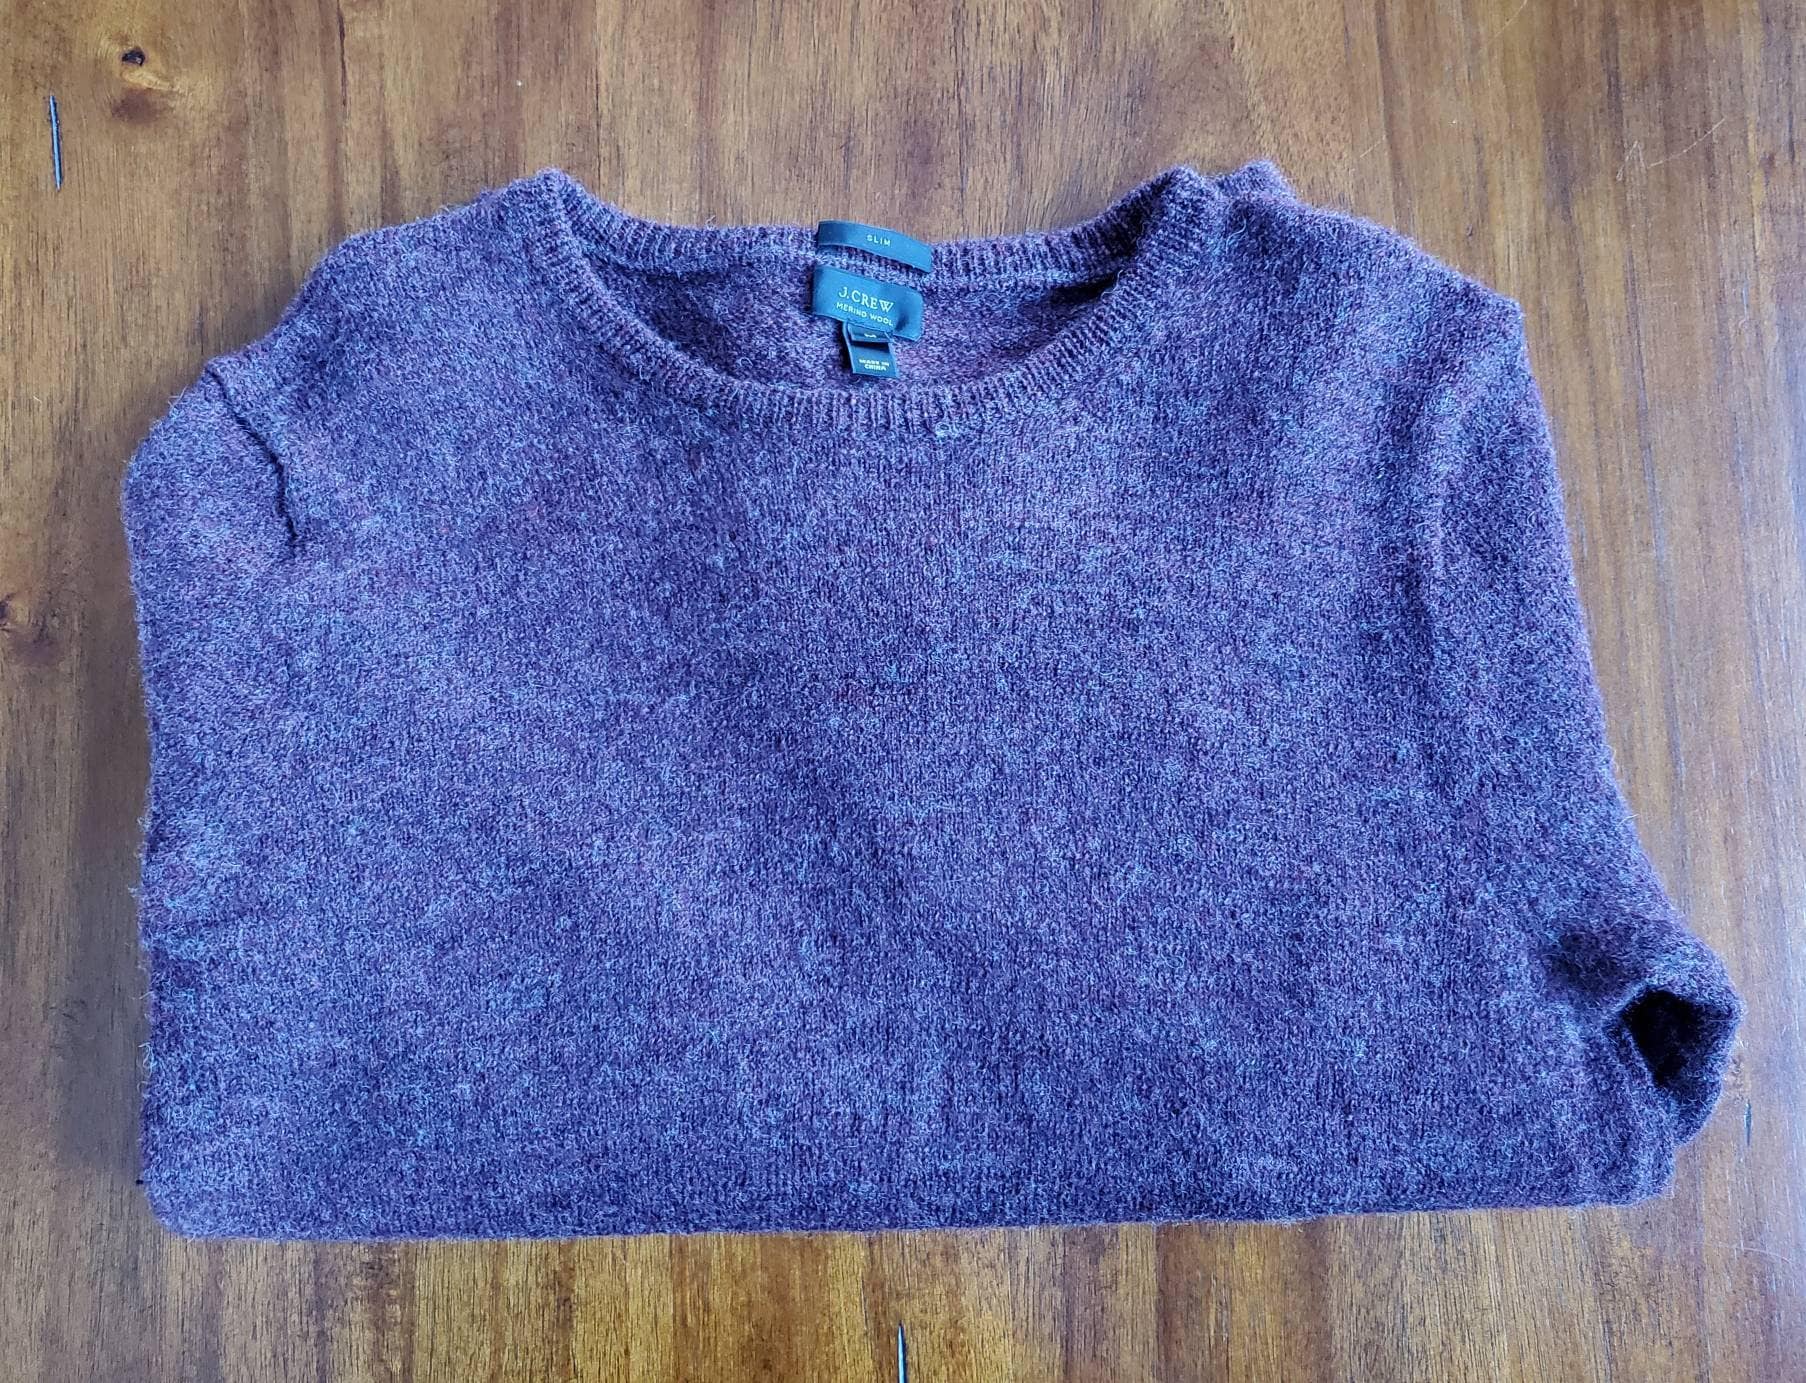 J. Crew 100% Wool Leather Elbow Patch Light Blue Pullover Sweater Size Small